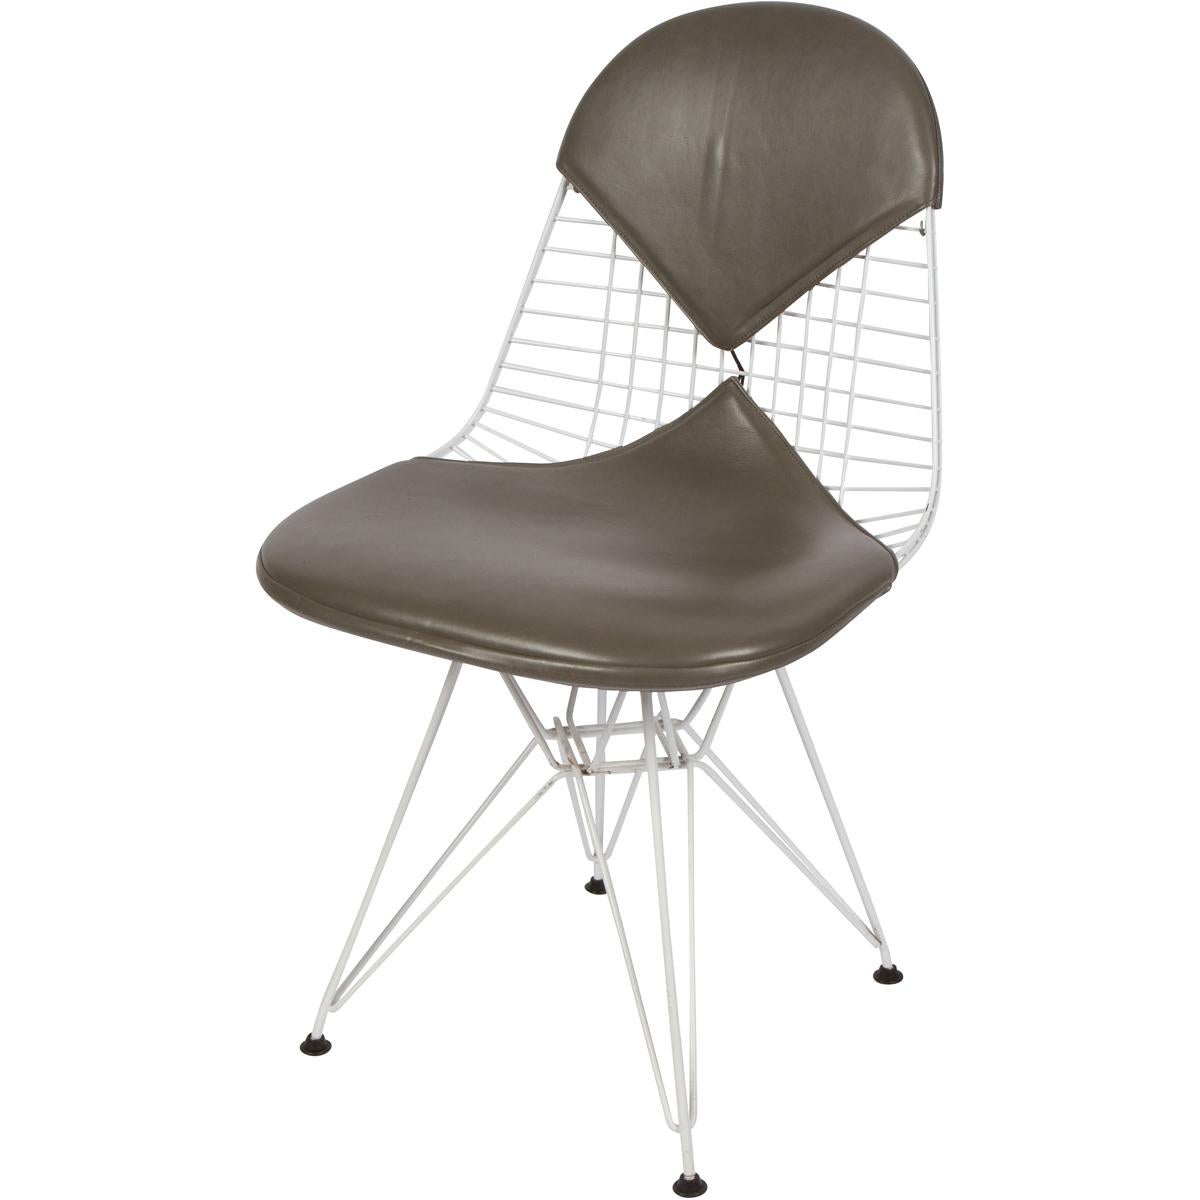 Vintage Eames DKR chairs with gray leather bikini pads produced for Herman Mimller, 1980s.